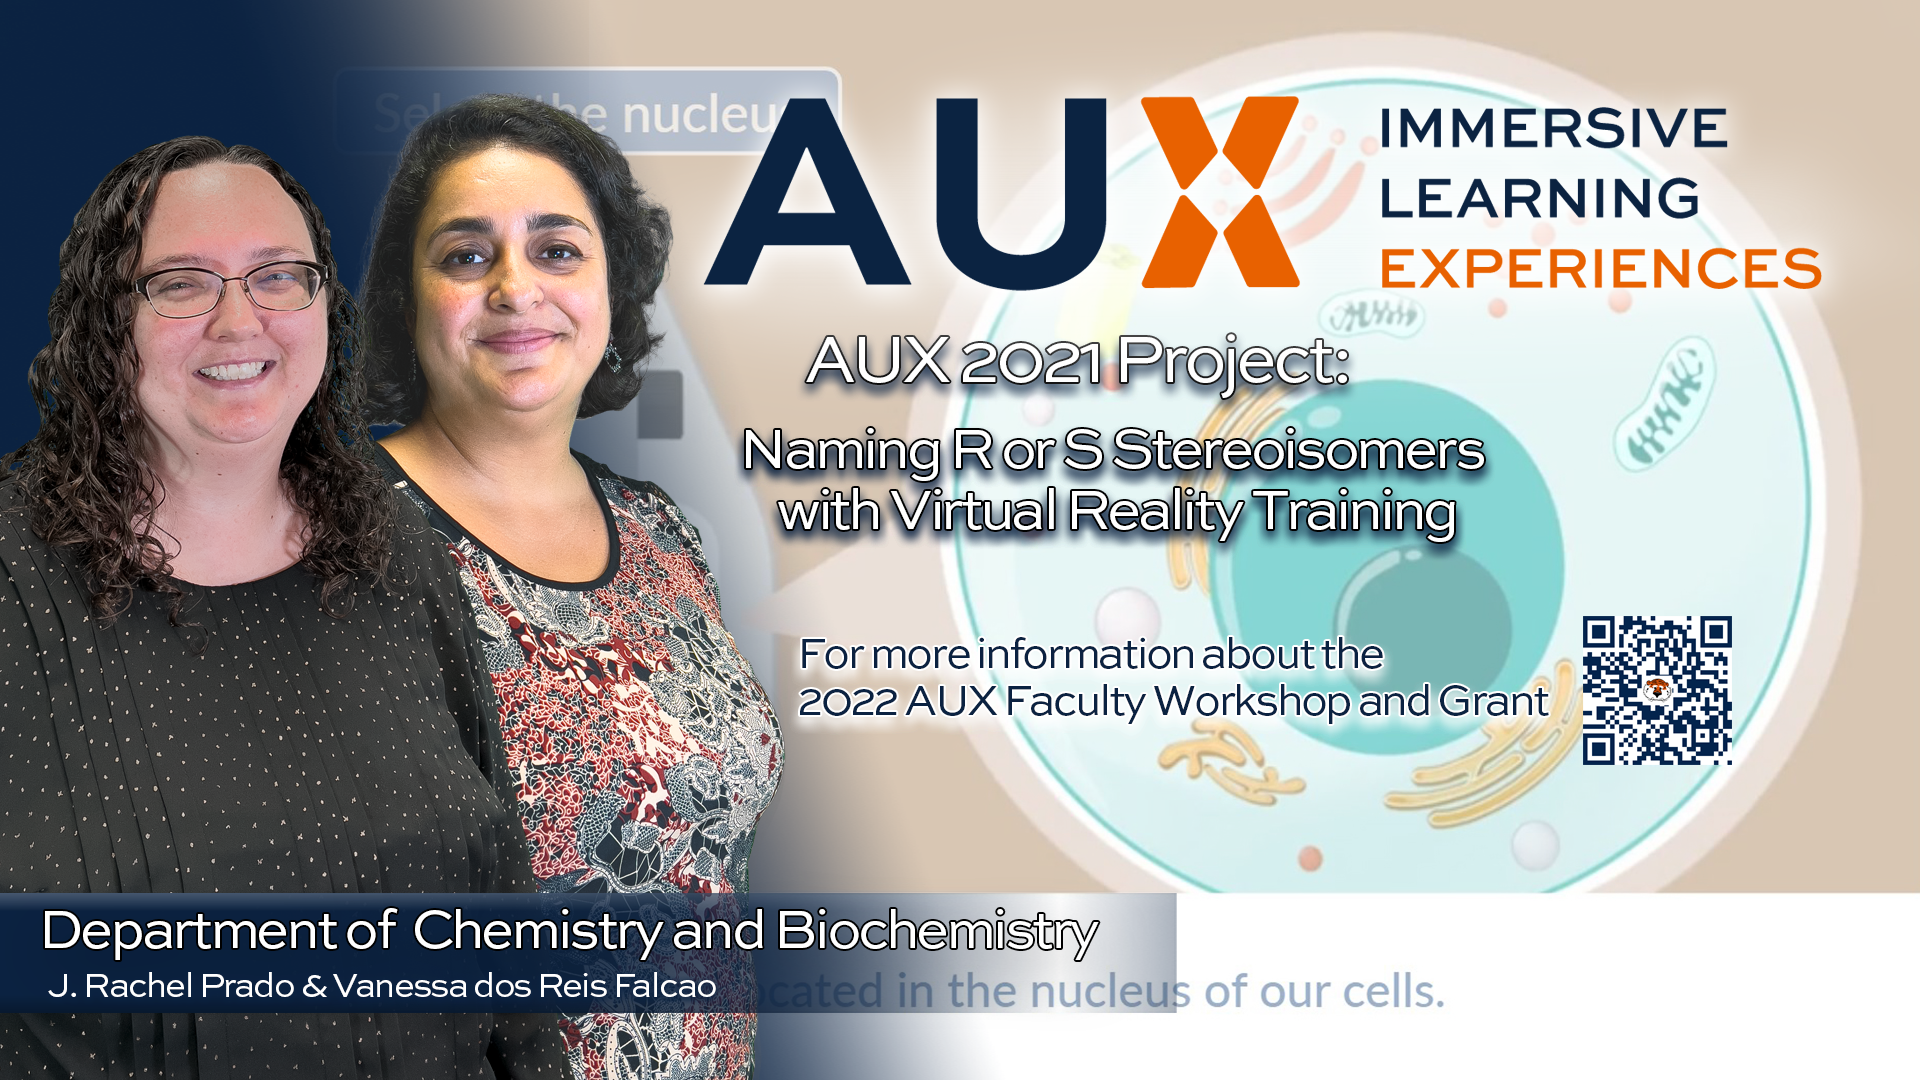 COSAM’s Prado and Falcao to present at 2022 AUX: Immersive Learning Experiences Workshop